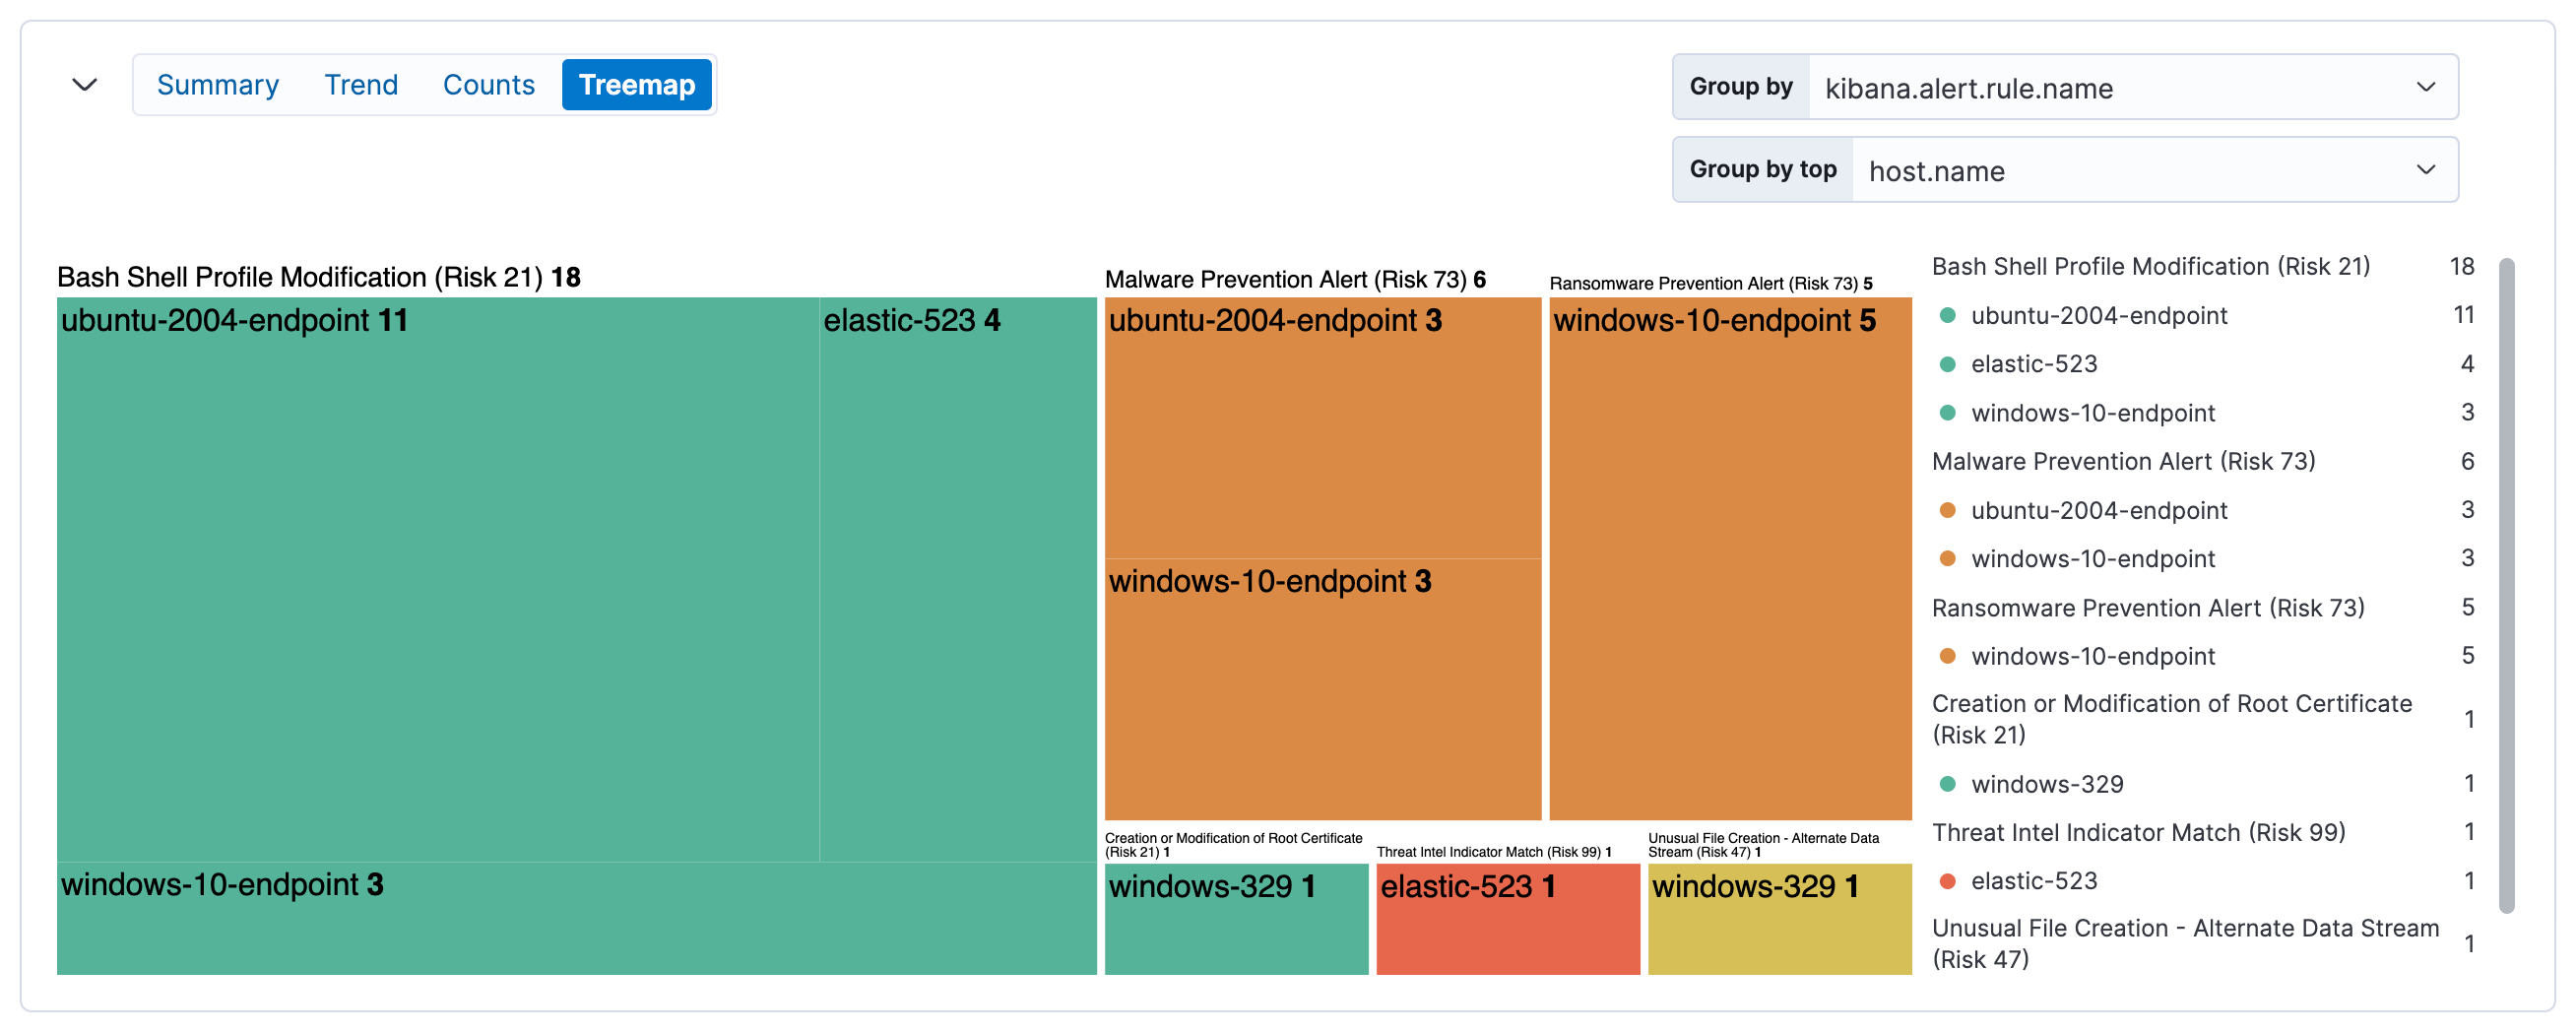 Treemap visualization for alerts